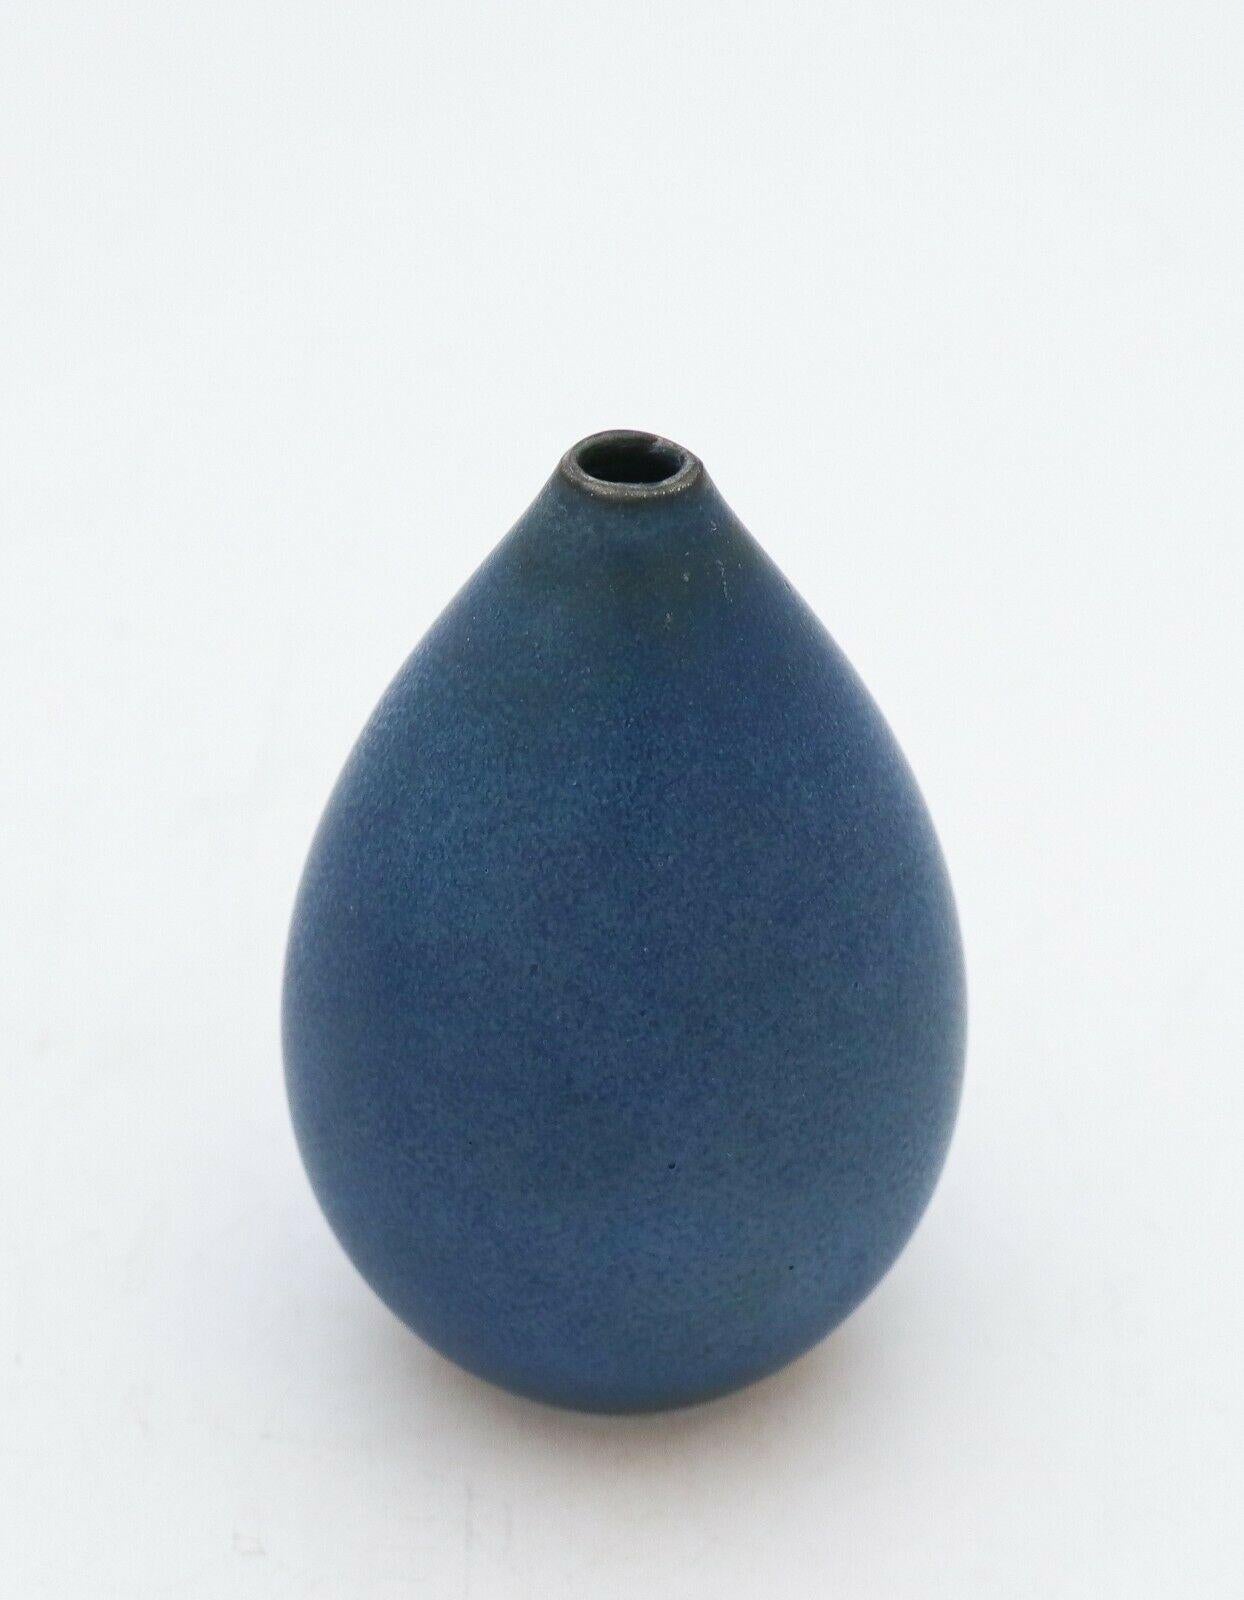 A beautiful midcentury Swedish vase in stoneware by Rörstrand, designed by Carl-Harry Stålhane. It is marked as 2nd quality with the white line through the backstamp, because of some minor marks in the glaze.

Carl-Harry Stålhane is one of the top